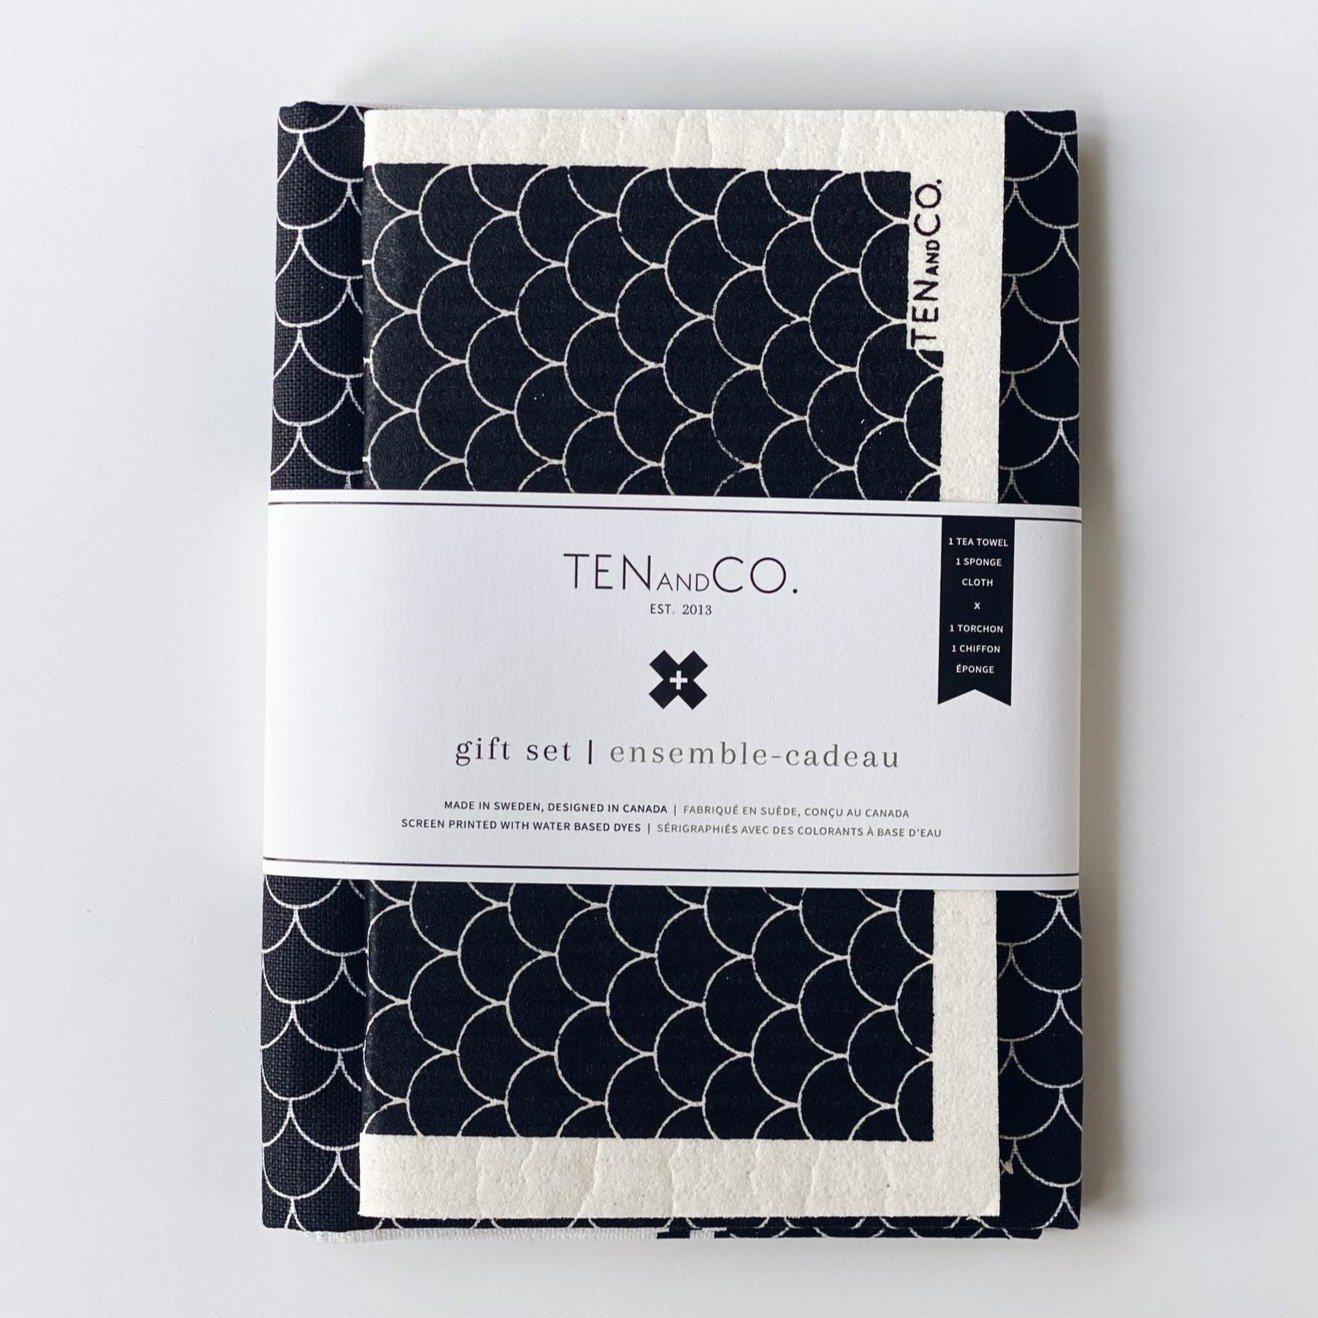 Swedish Sponge Cloth and Tea Towel Gift Set - Scallop Black by Ten & Co Kitchen Ten and Co Prettycleanshop